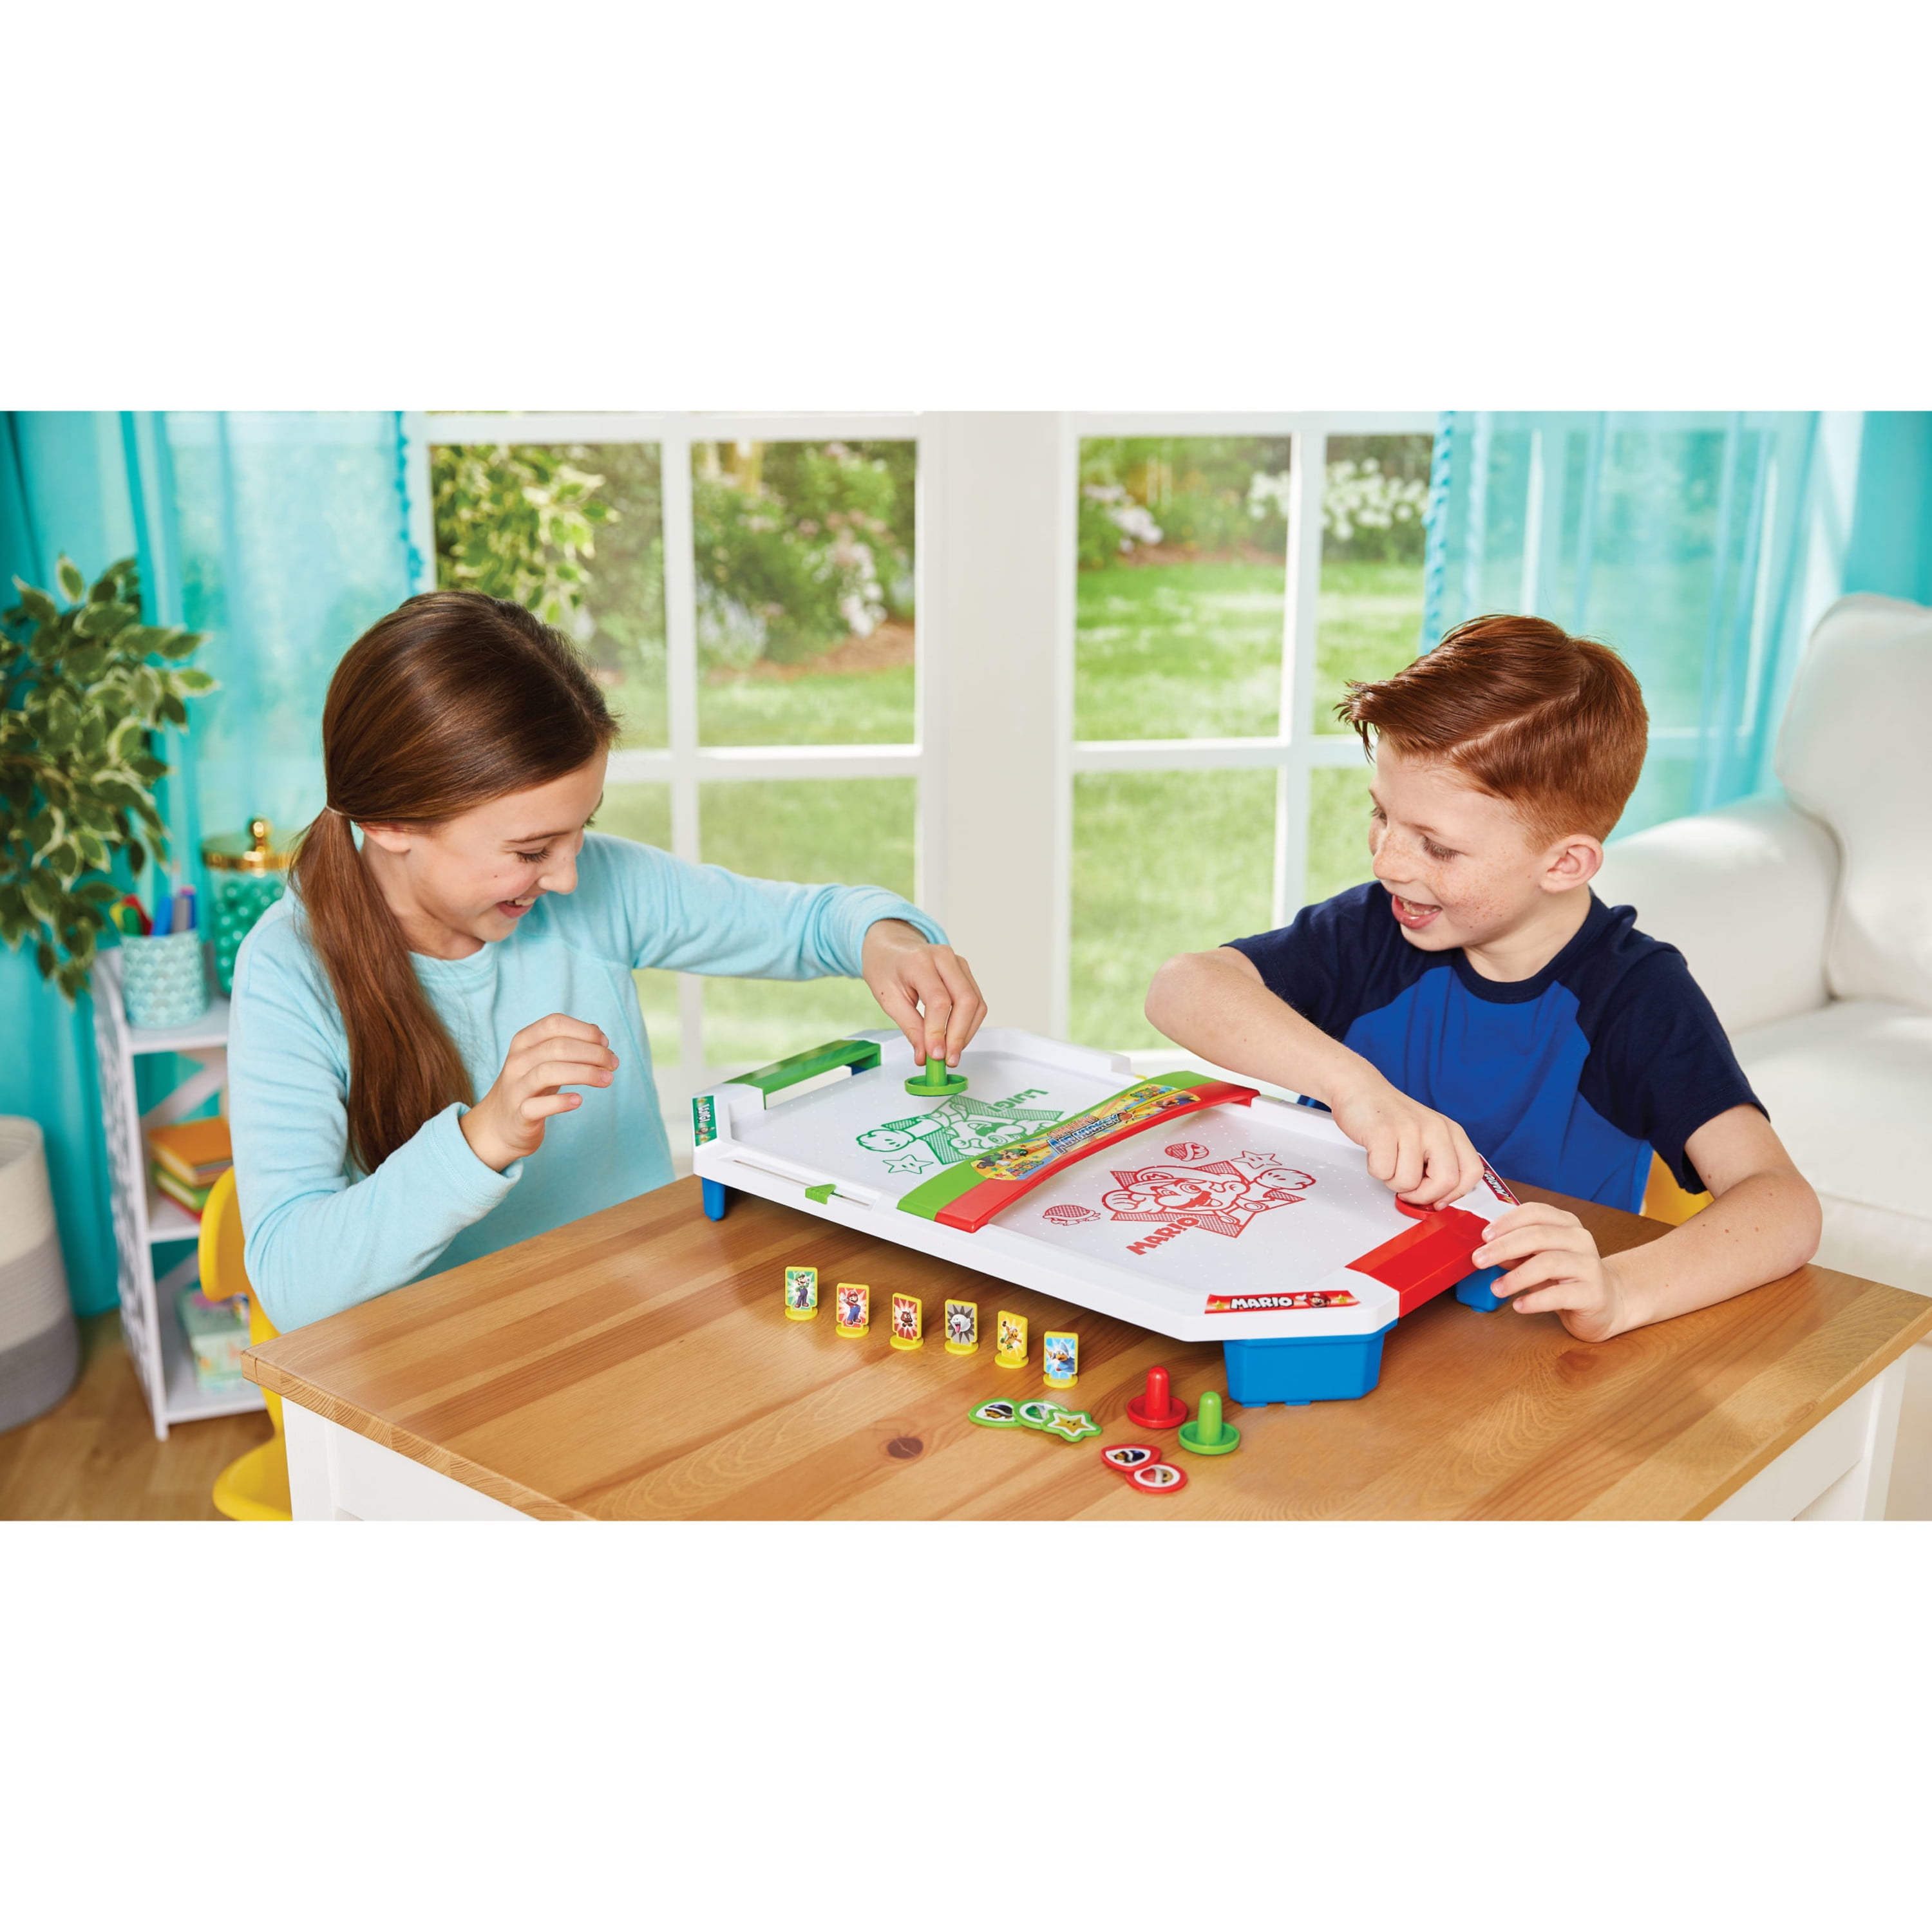 Super Game Action Epoch Games Action Mario and Mario Tabletop Hockey, Figures with Super Air Skill Collectible